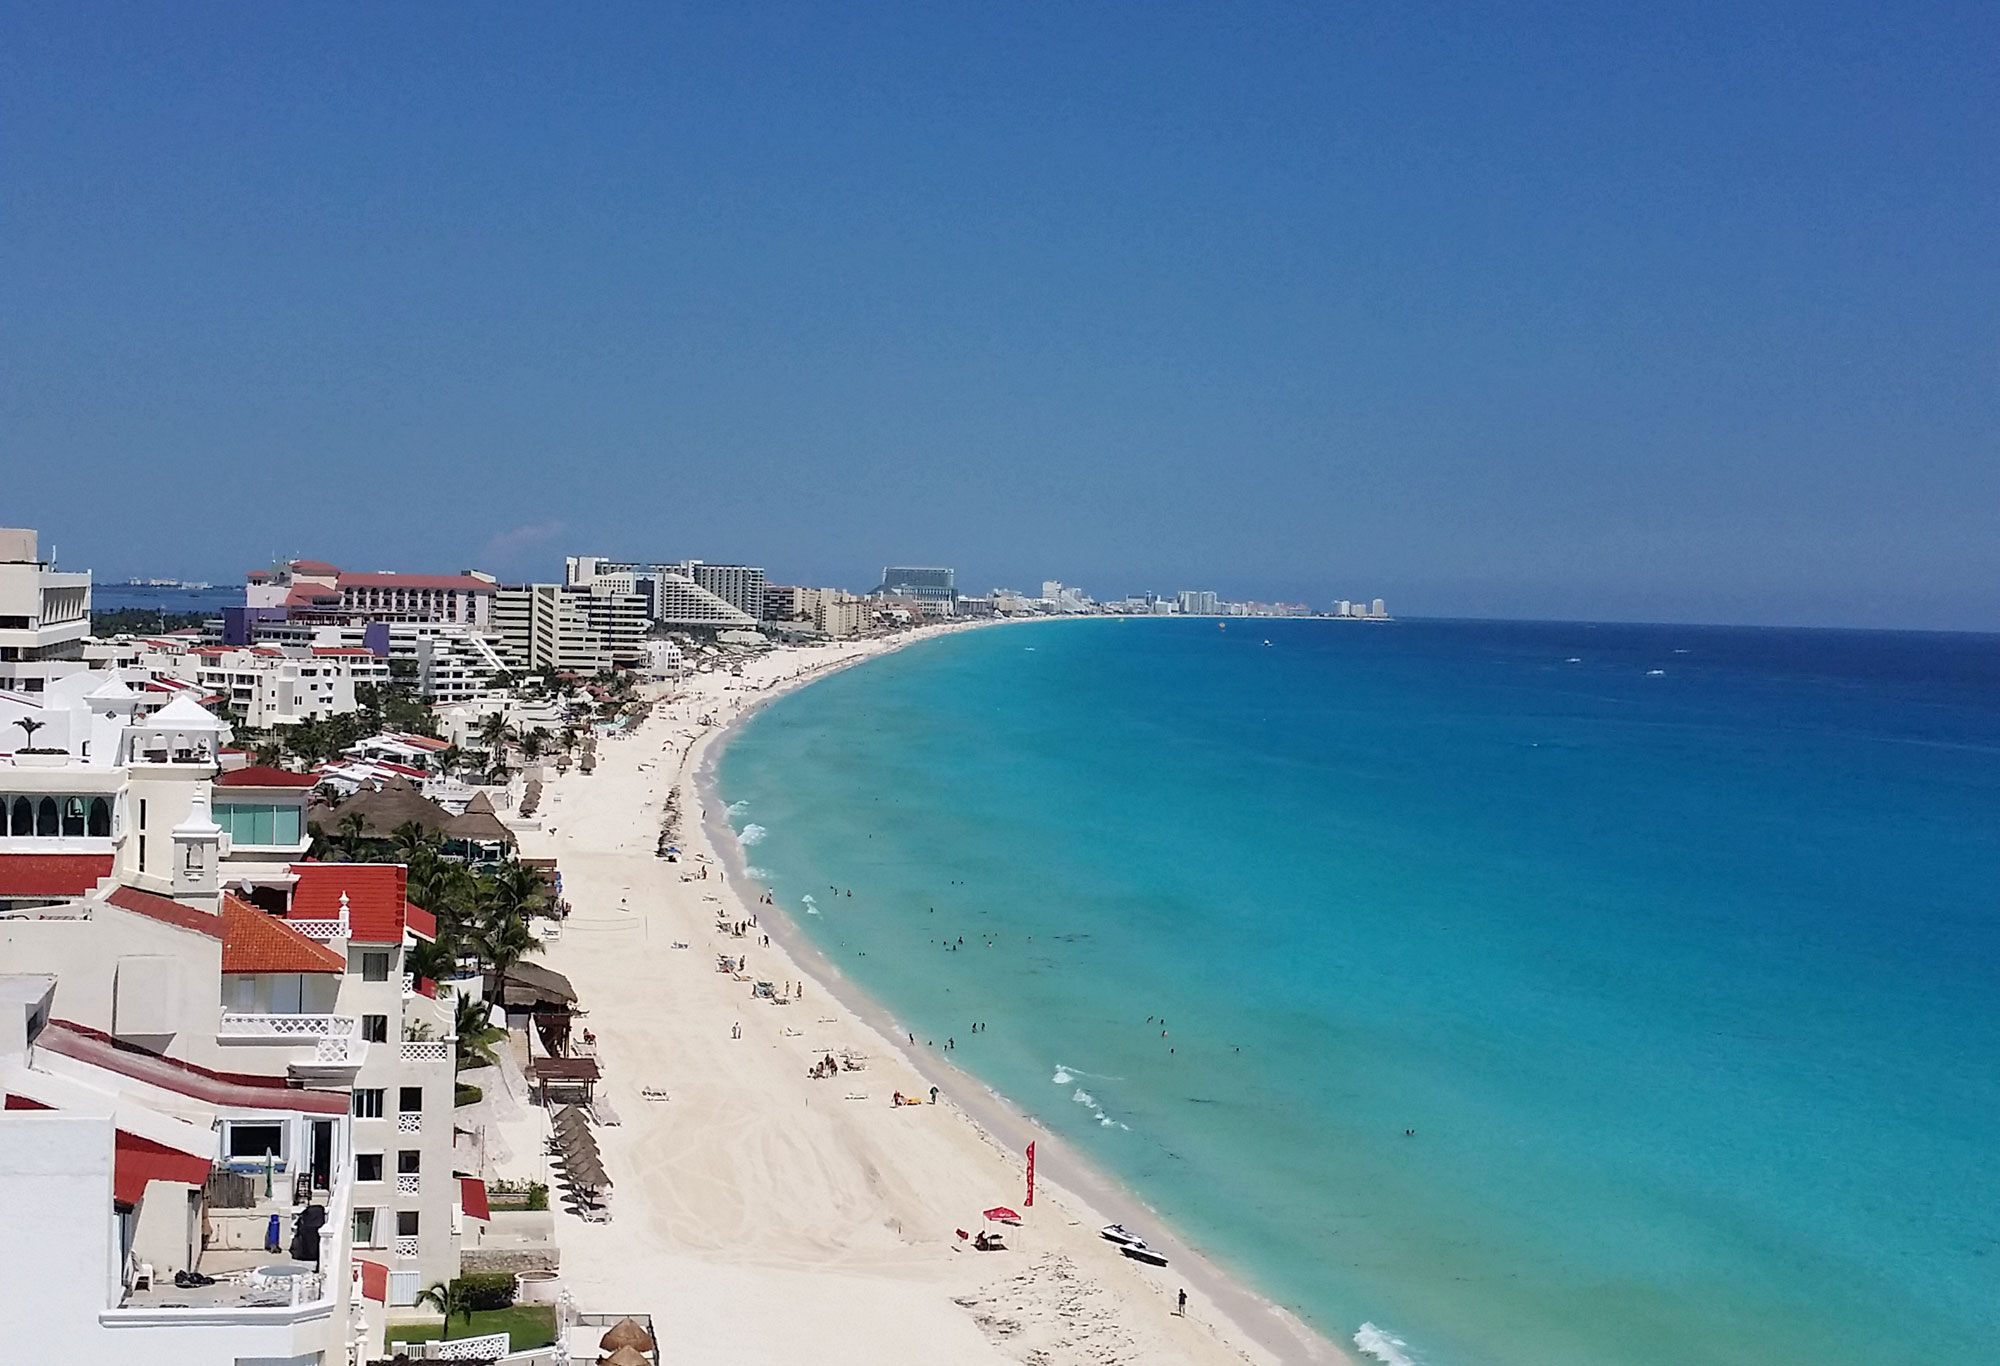 Is it safe to travel in Cancun? Tim's Ocean Condos